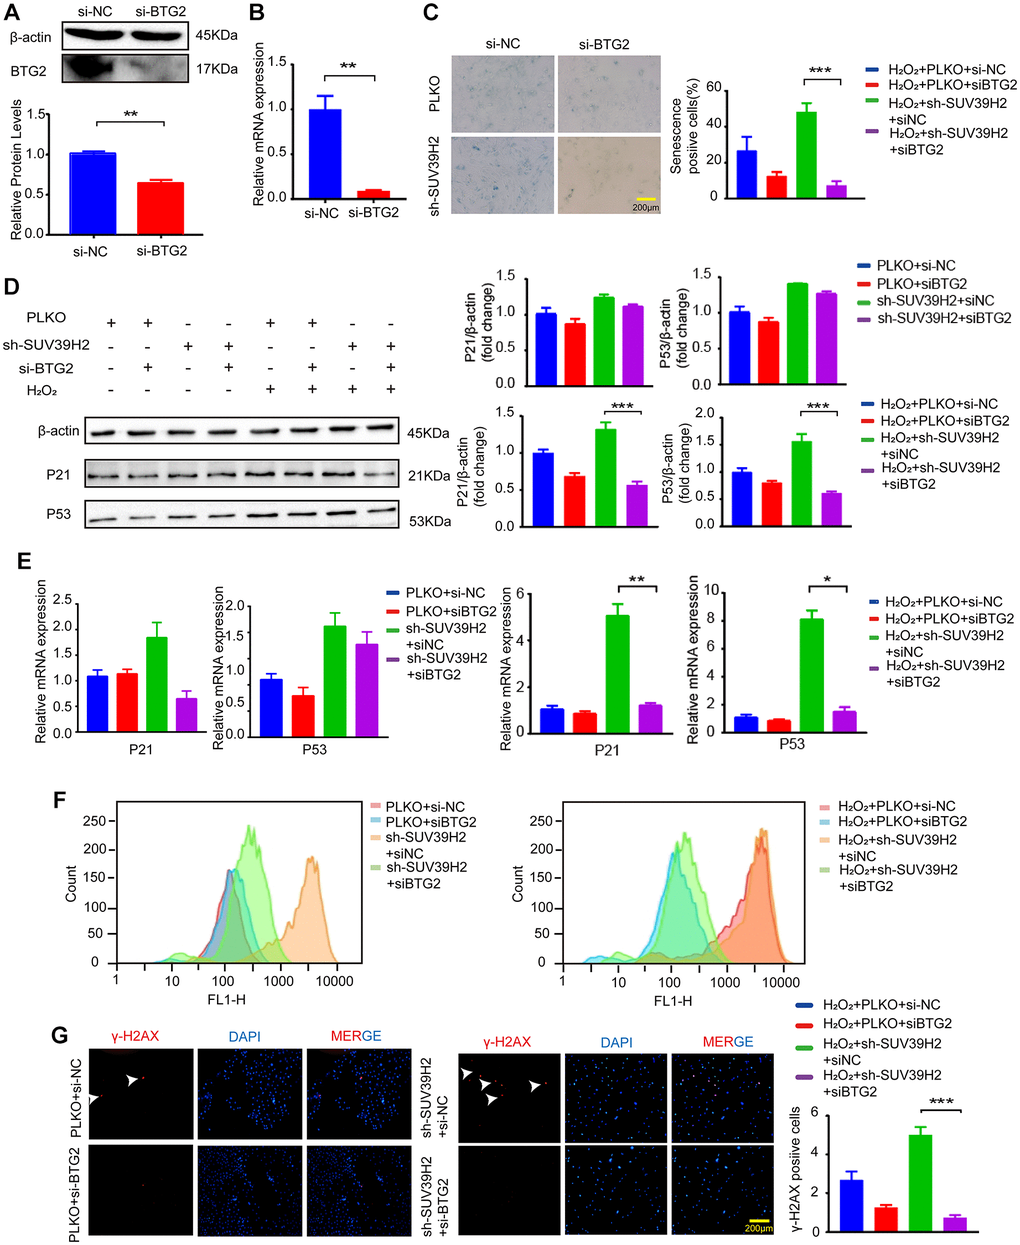 BTG2 reversed the aging phenotype in knockdown SUV39H2 H9C2 cells. (A–B) After transfection of si-BTG2 and control si-NC into H9C2 cells, the cells were collected 48 h later for RT-PCR and western blotting. (C) PLKO-H9C2 and sh-SUV39H2-H9C2 cell lines were cultured in 50 μM H2O2 added with or without siBTG2 for 48 hours. And an SA-β-Gal staining kit was used to detect senescence cells. (D–G) PLKO-H9C2 and sh-SUV39H2-H9C2 cell lines were cultured in normal medium or 50 μM H2O2 medium added with or without siBTG2 for 48 hours. (D) Western blotting for p21 and p53 in mentioned above groups were performed, and the level of β-actin protein was measured as the control. (E) The expression of p21 and p53 in mentioned above groups were quantified by RT-PCR. (F) Flow cytometry was used to quantitatively detect the ROS production of mentioned above groups. (G) The cells in mentioned above groups were fixed and analyzed by immunofluorescence to detect the expression level of γ-H2AX. All the experiments have been repeated independently at least 3 times. *P **P ***P 